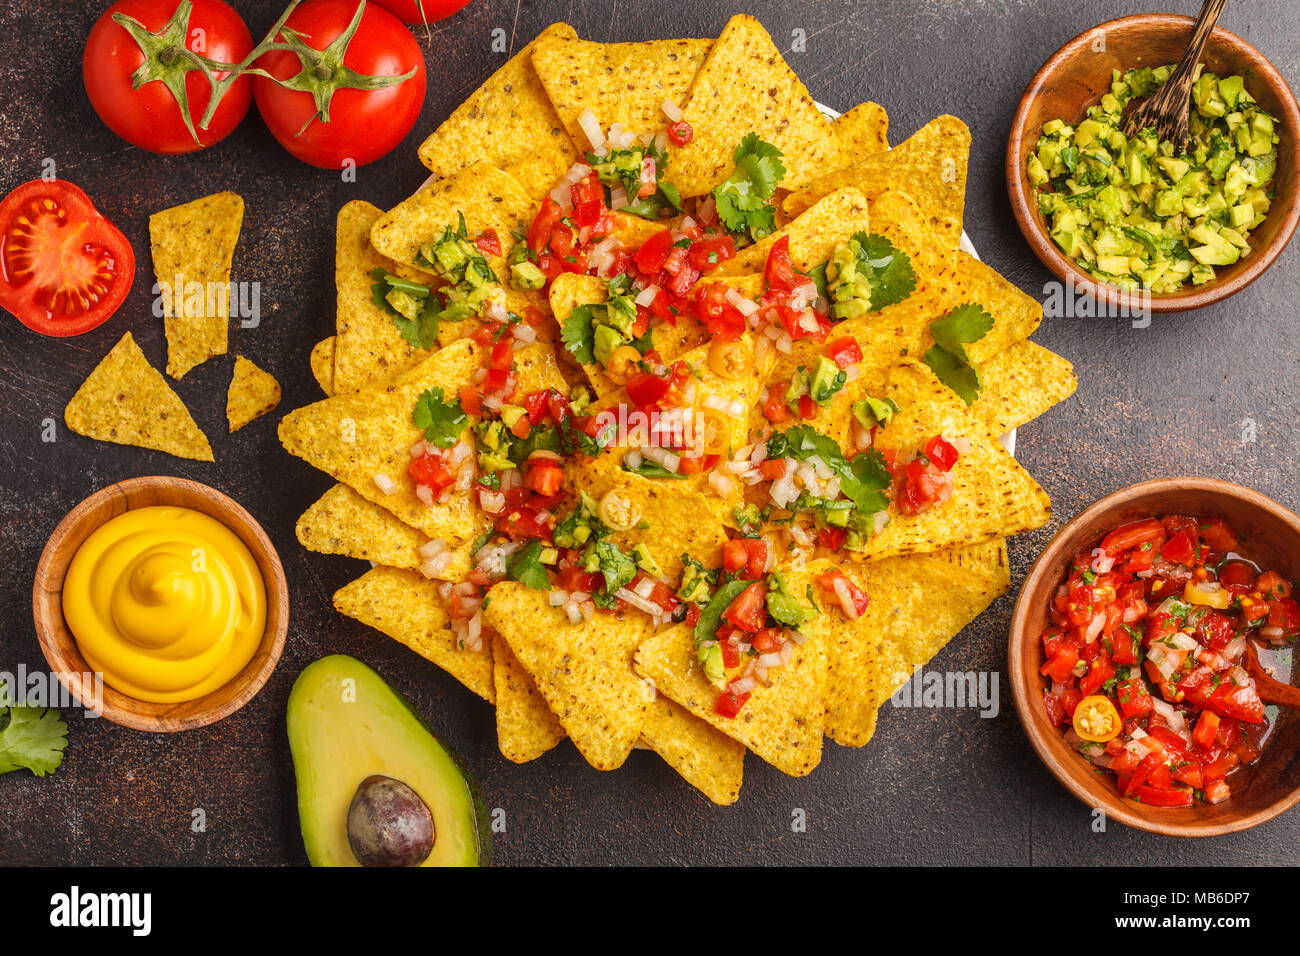 Mexican food concept. Nachos - yellow corn totopos chips with various sauces in wooden bowls: guacamole, cheese sauce, pico del gallo Stock Photo